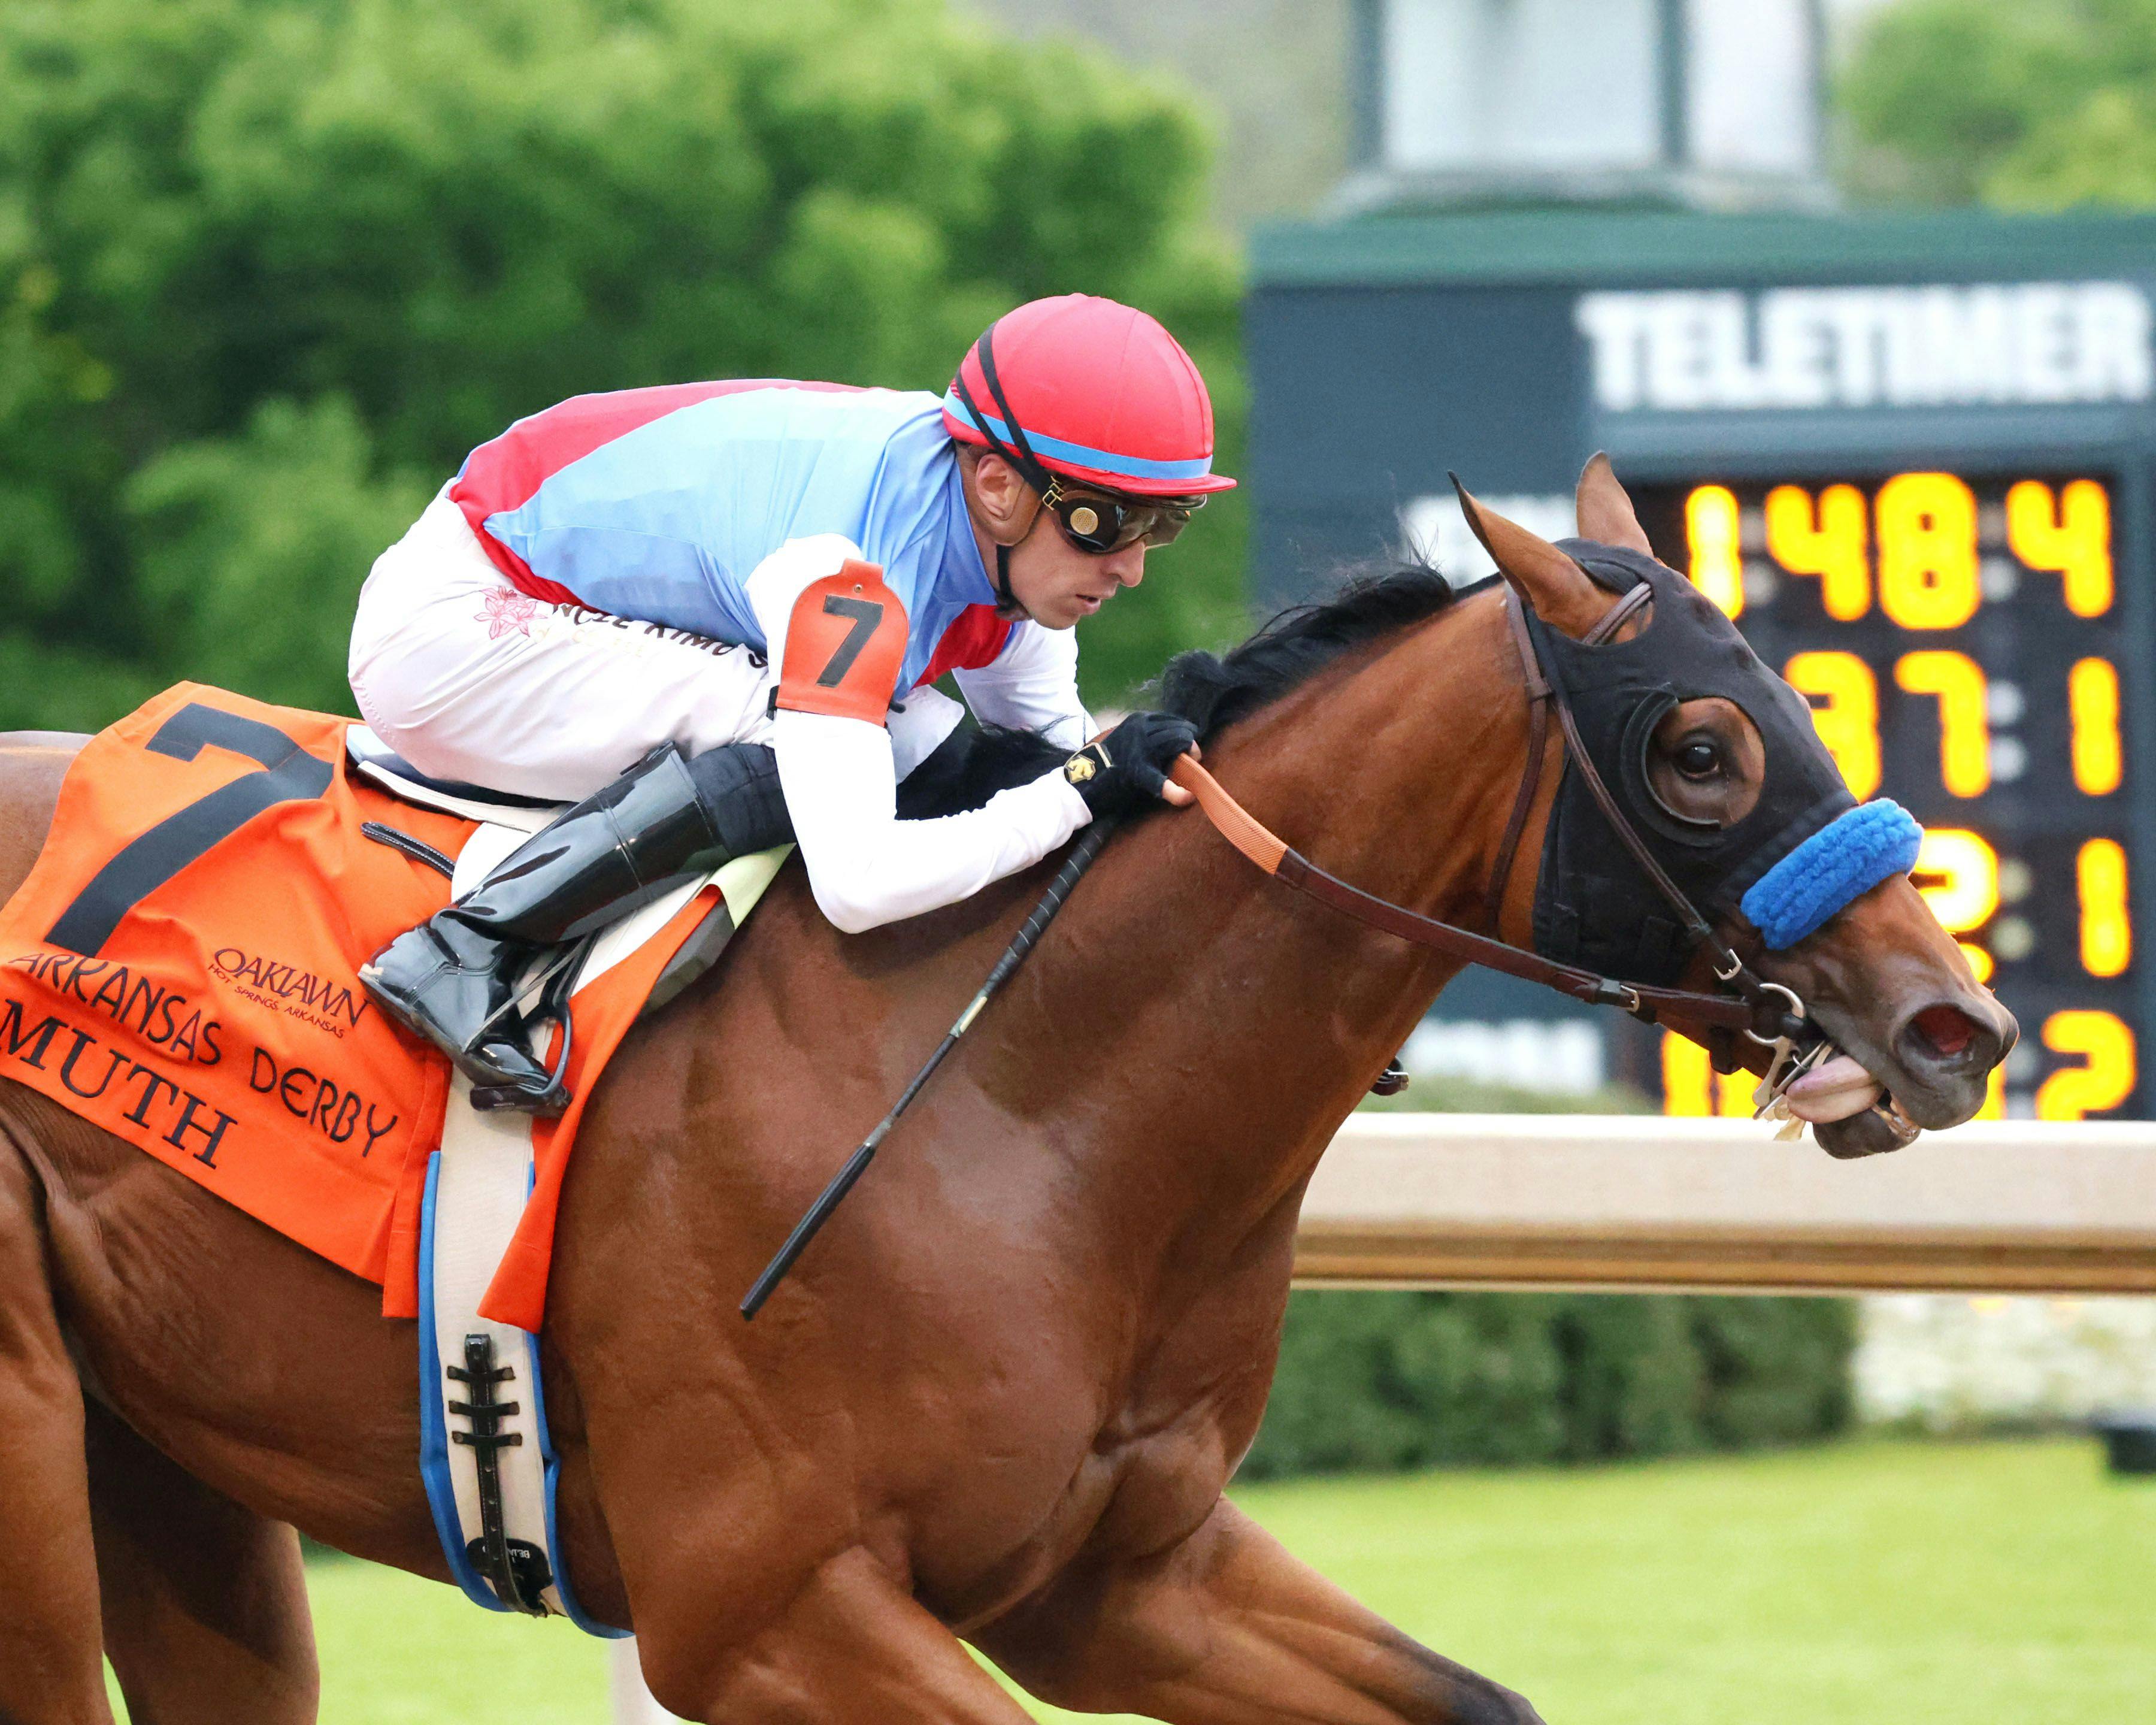 Preakness How do Derby alumni vs. new shooters compare? TwinSpires